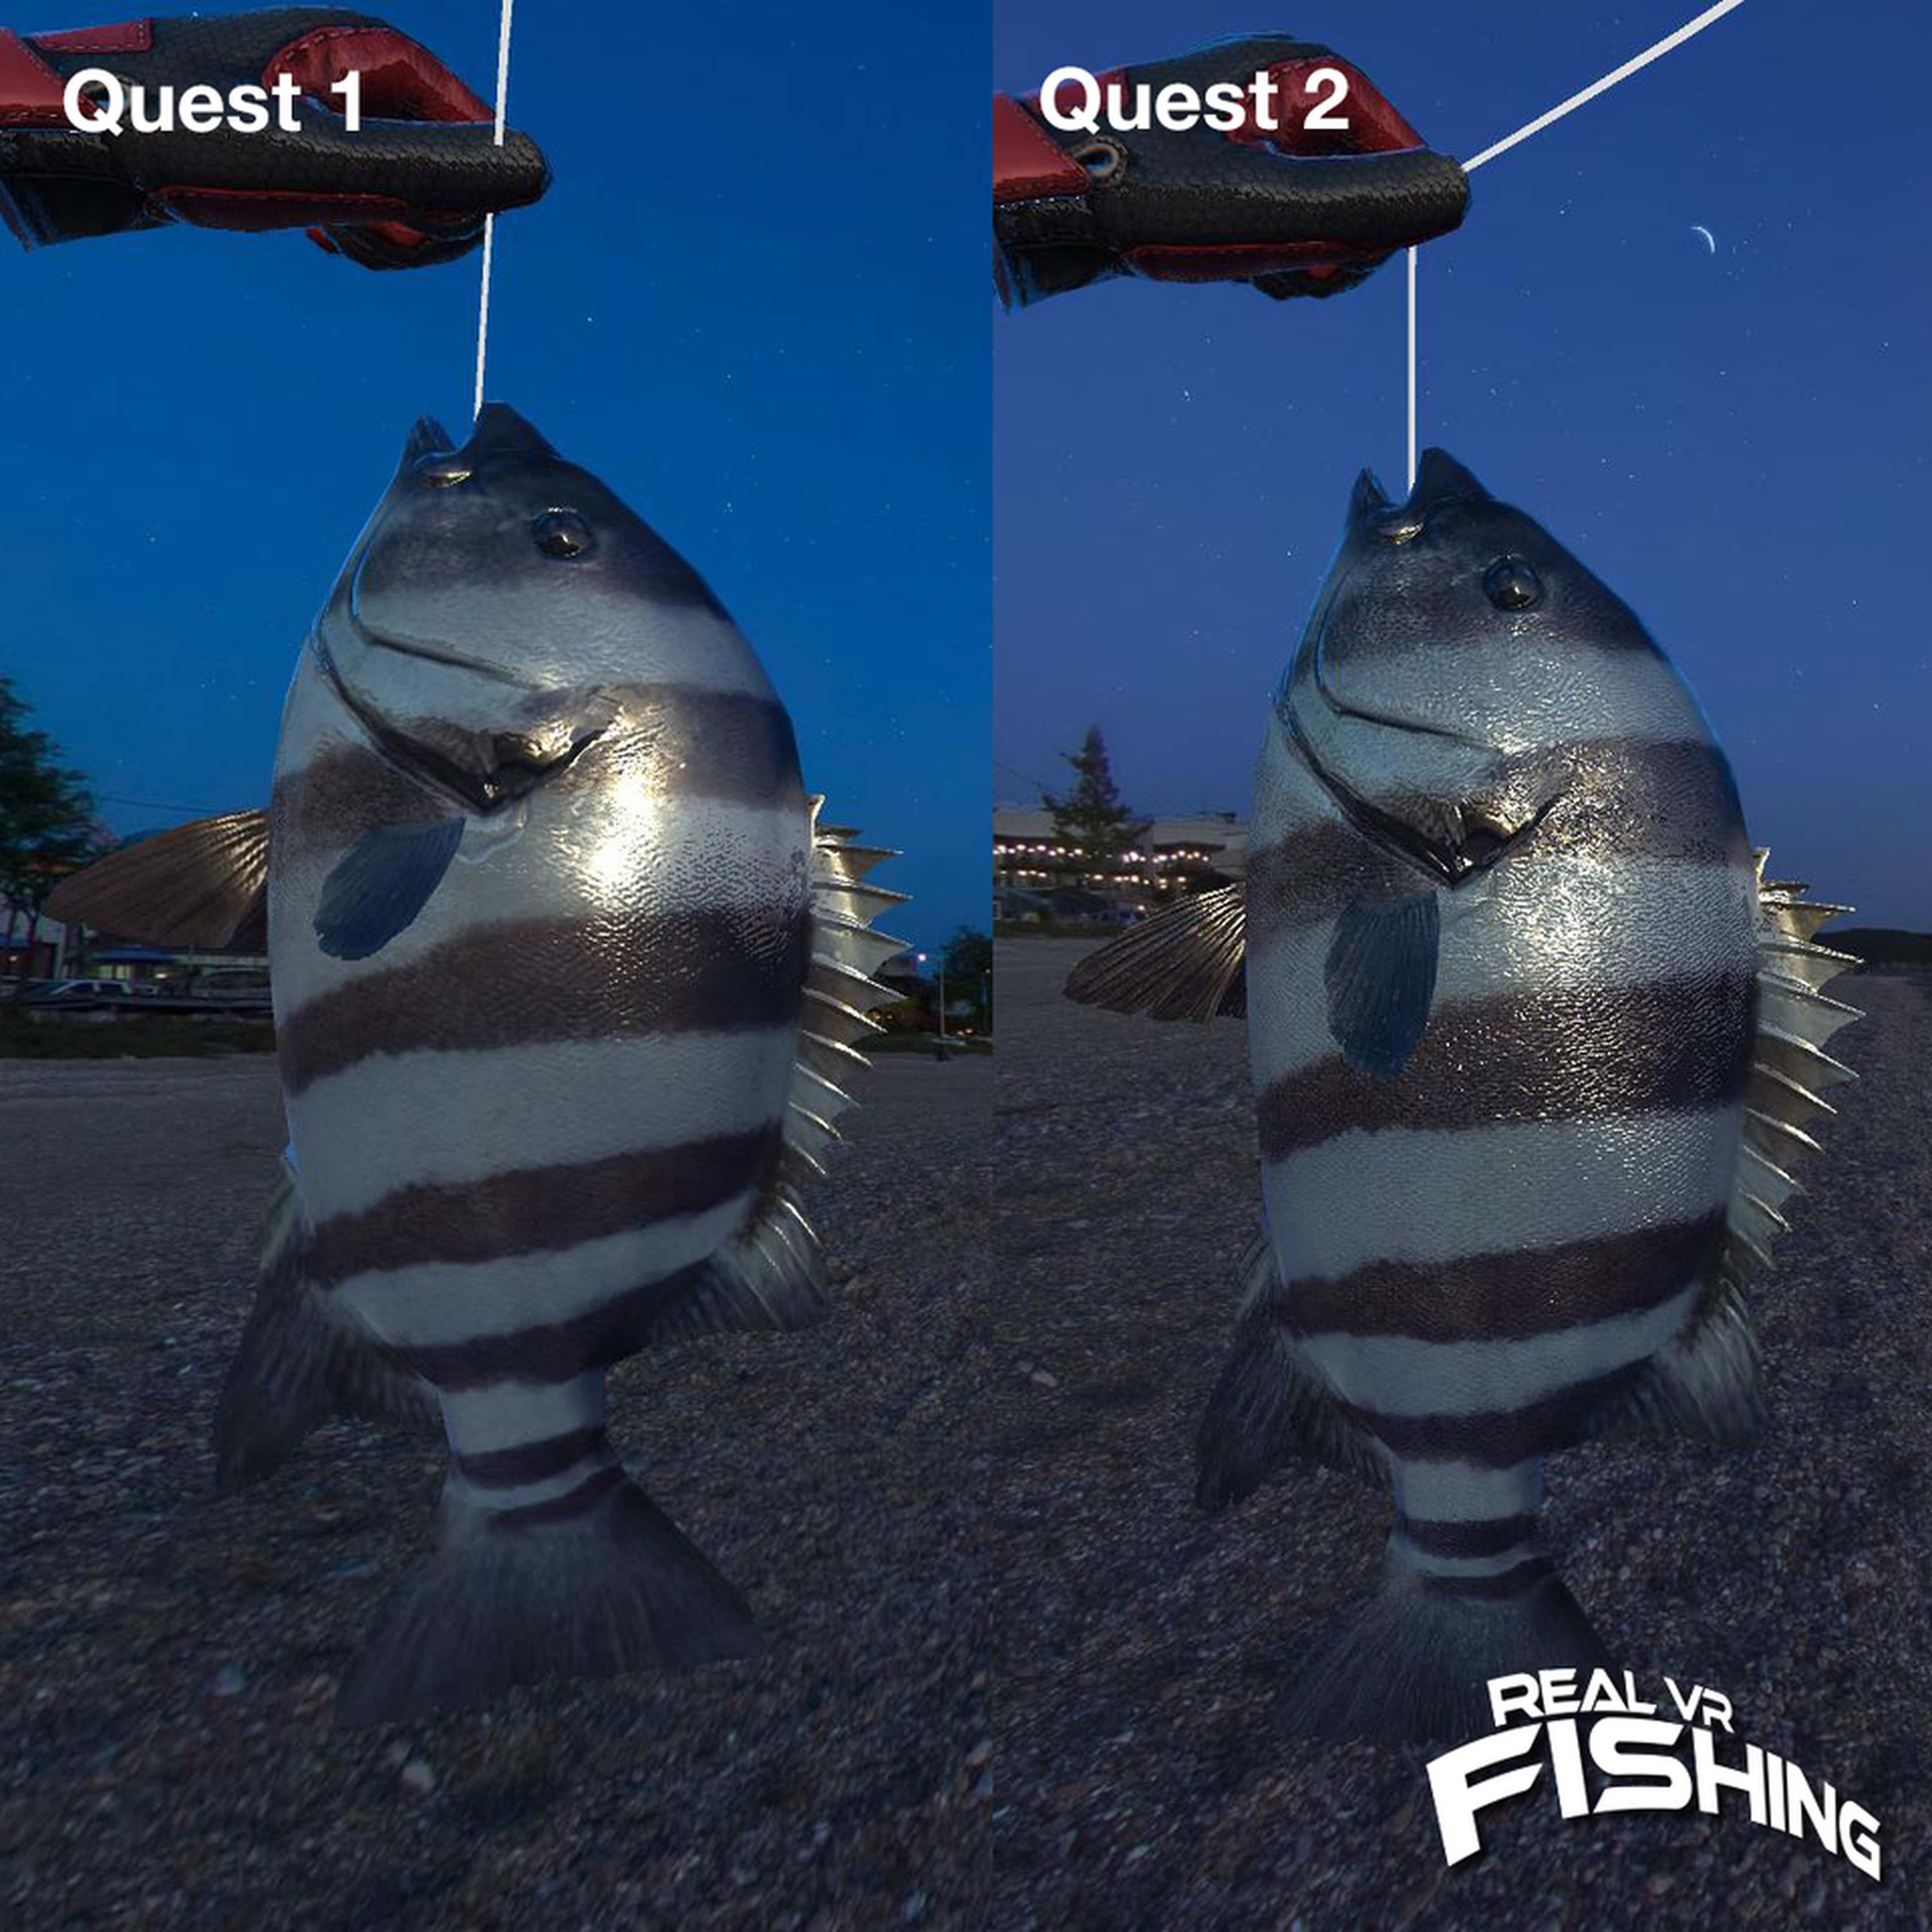 Real VR Fishing Oculus Quest 2